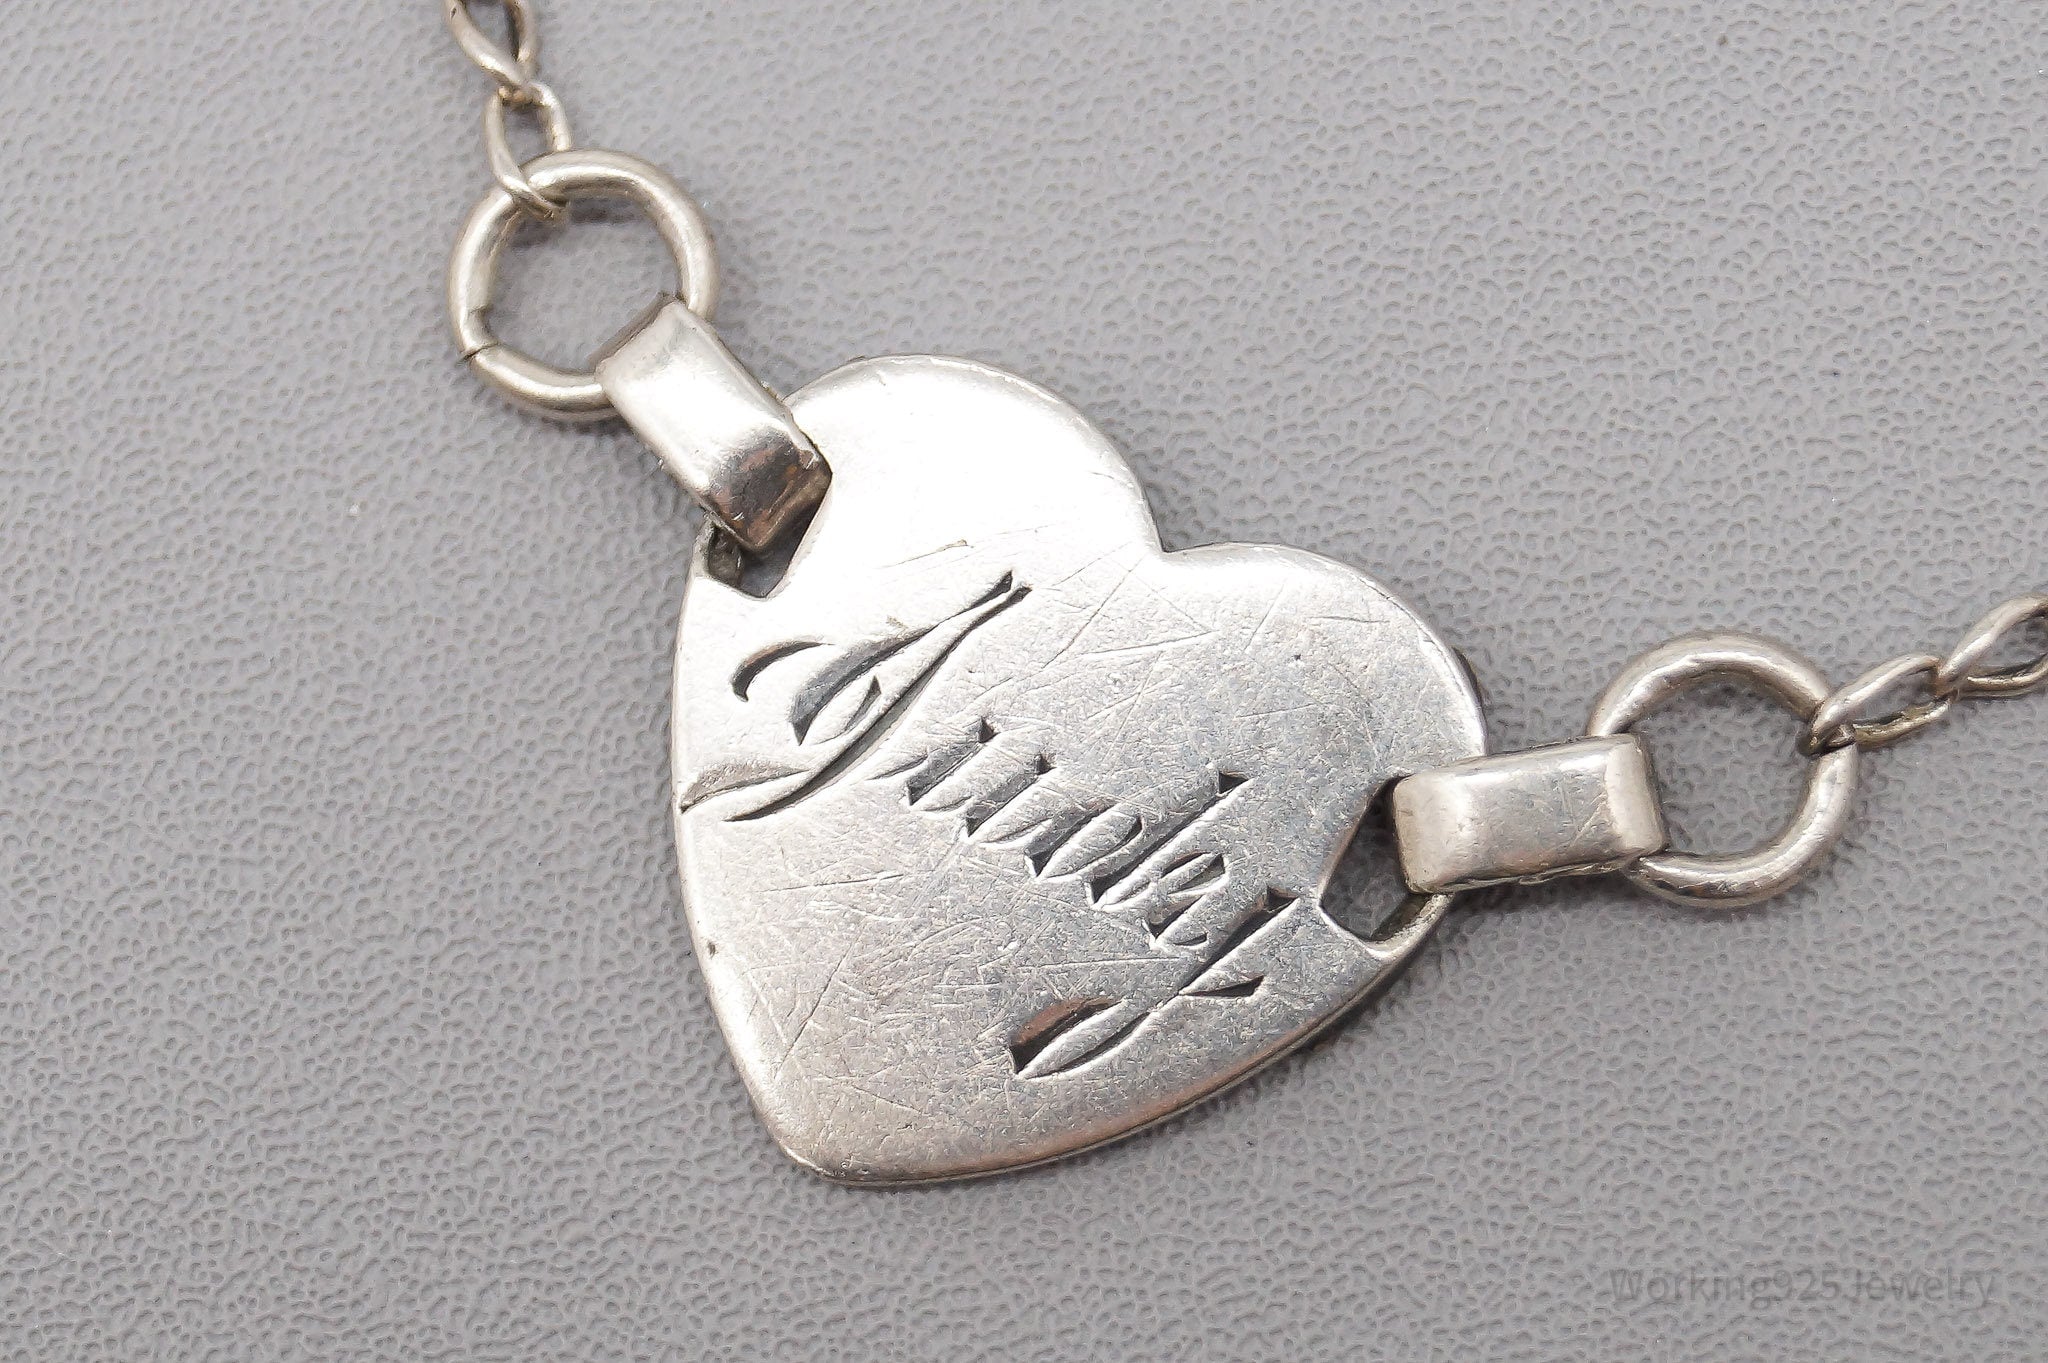 Antique "Judy" Name Etched Heart Silver Chain Bracelet - 6.5"